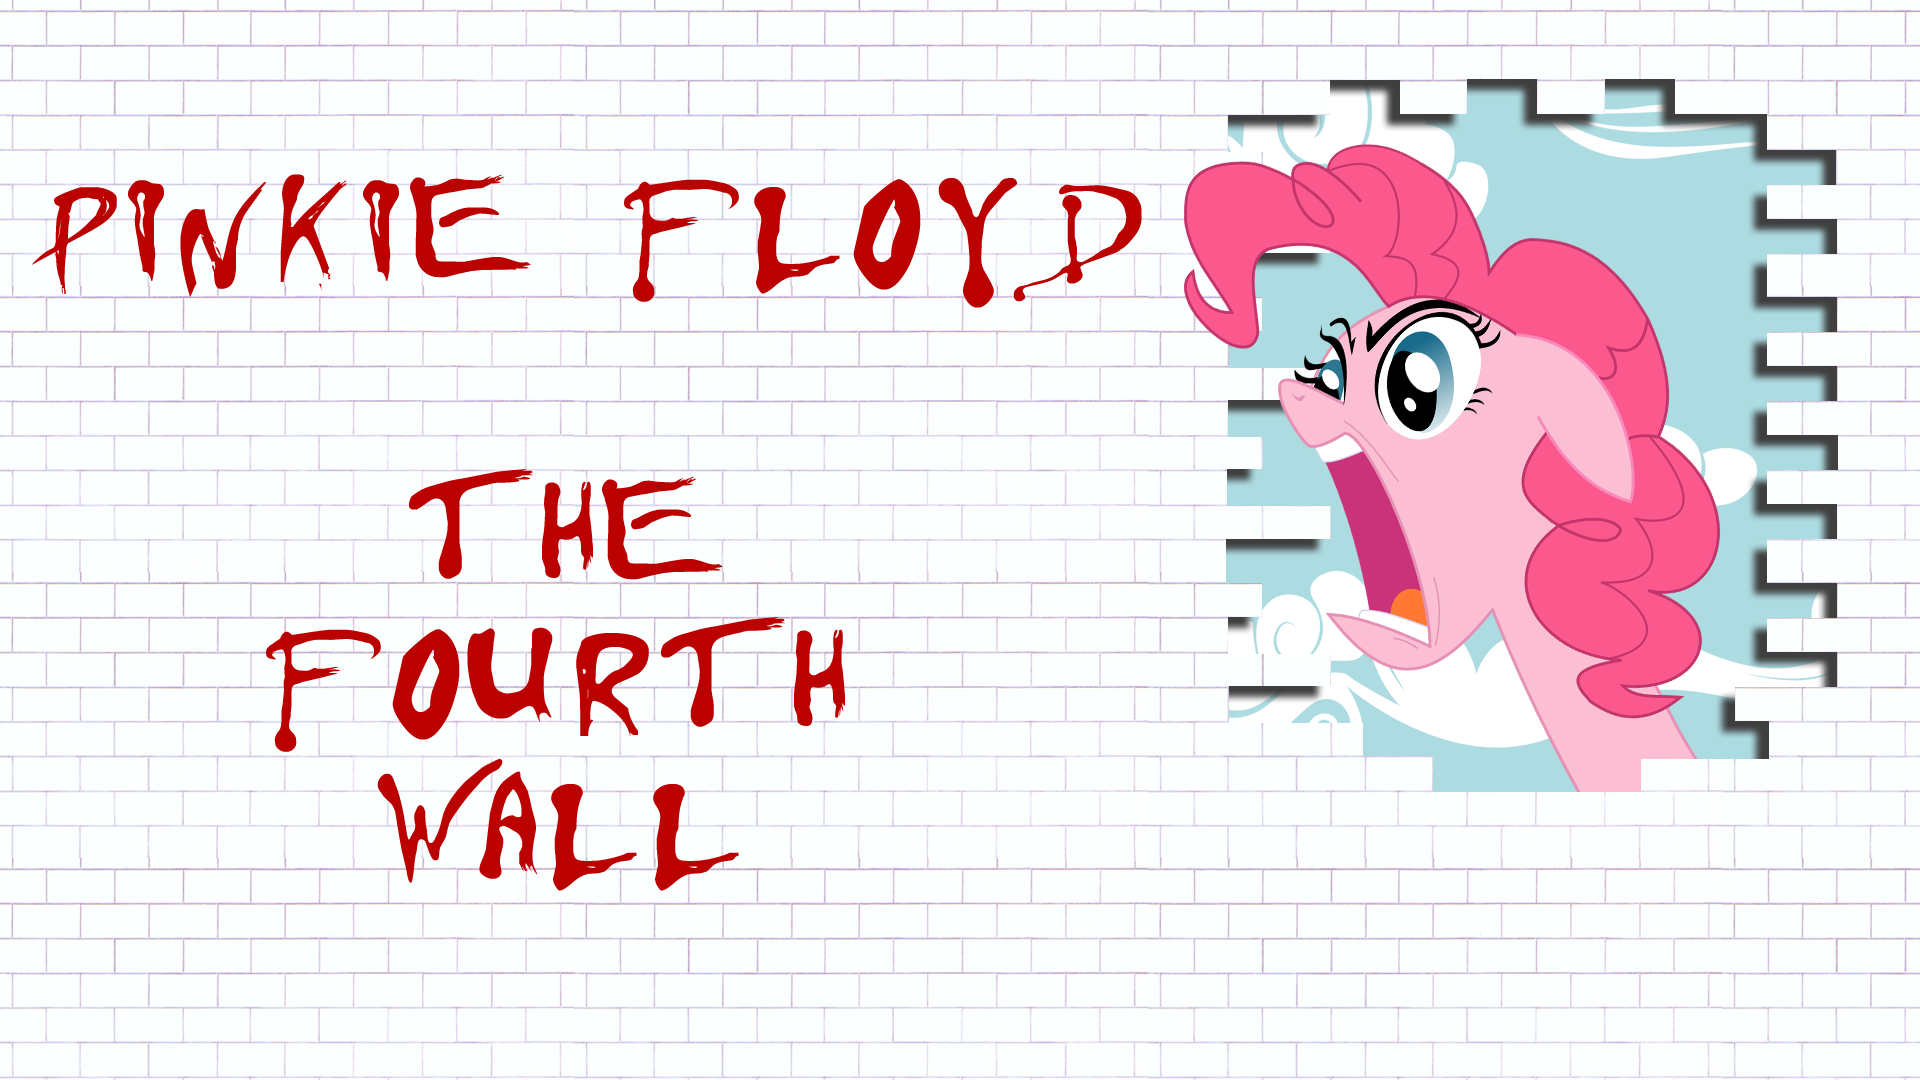 Pinkie Floyd 'The Fourth Wall' Wallpaper by BlueDragonHans, boxdrink and Pangbot